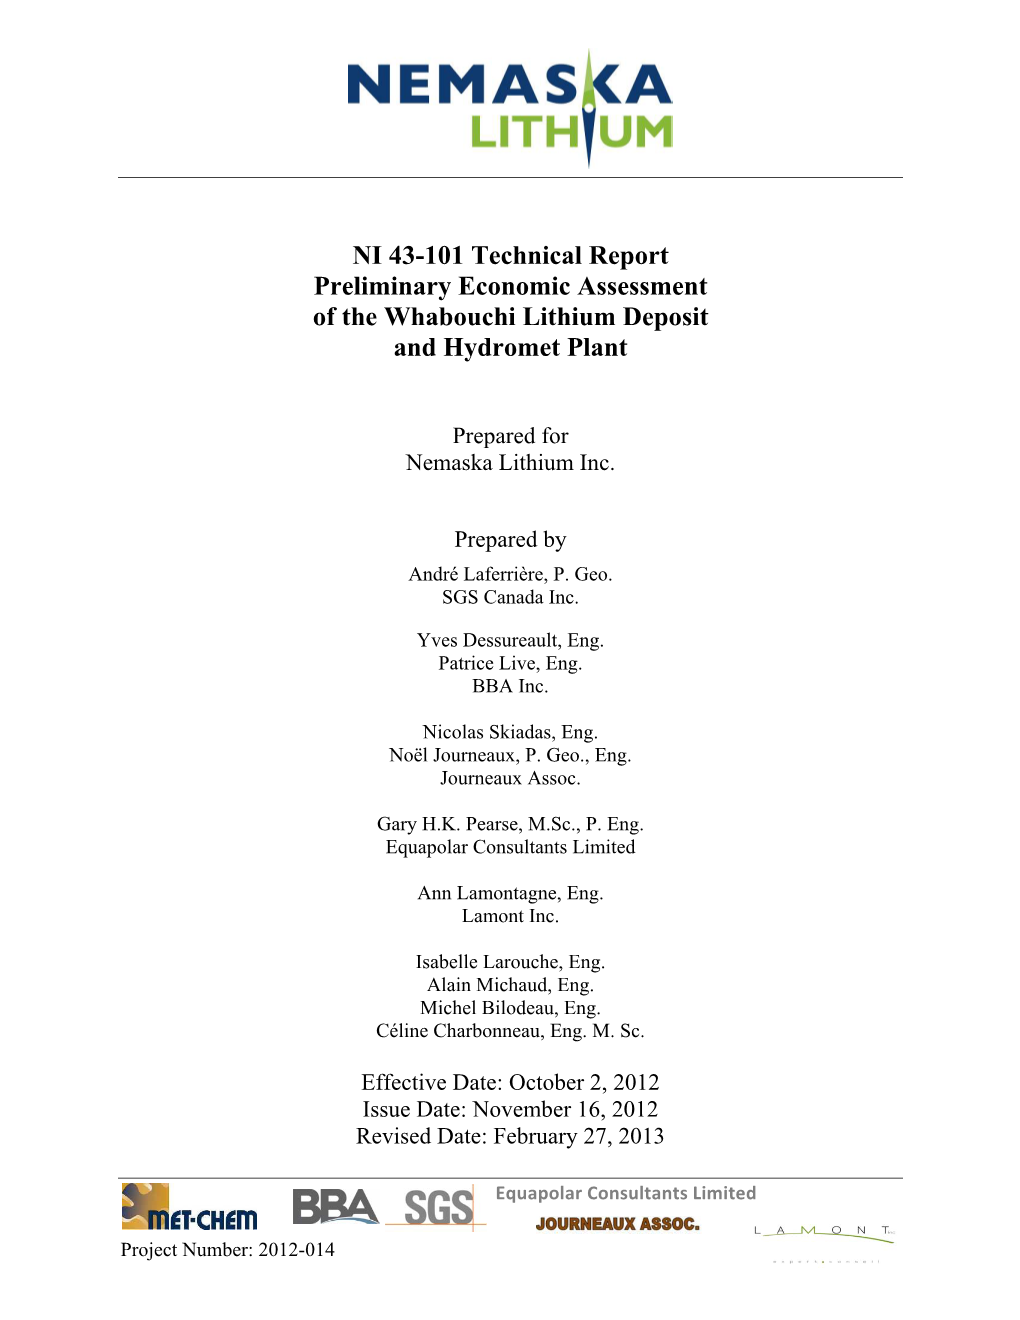 NI 43-101 Technical Report Preliminary Economic Assessment of the Whabouchi Lithium Deposit and Hydromet Plant